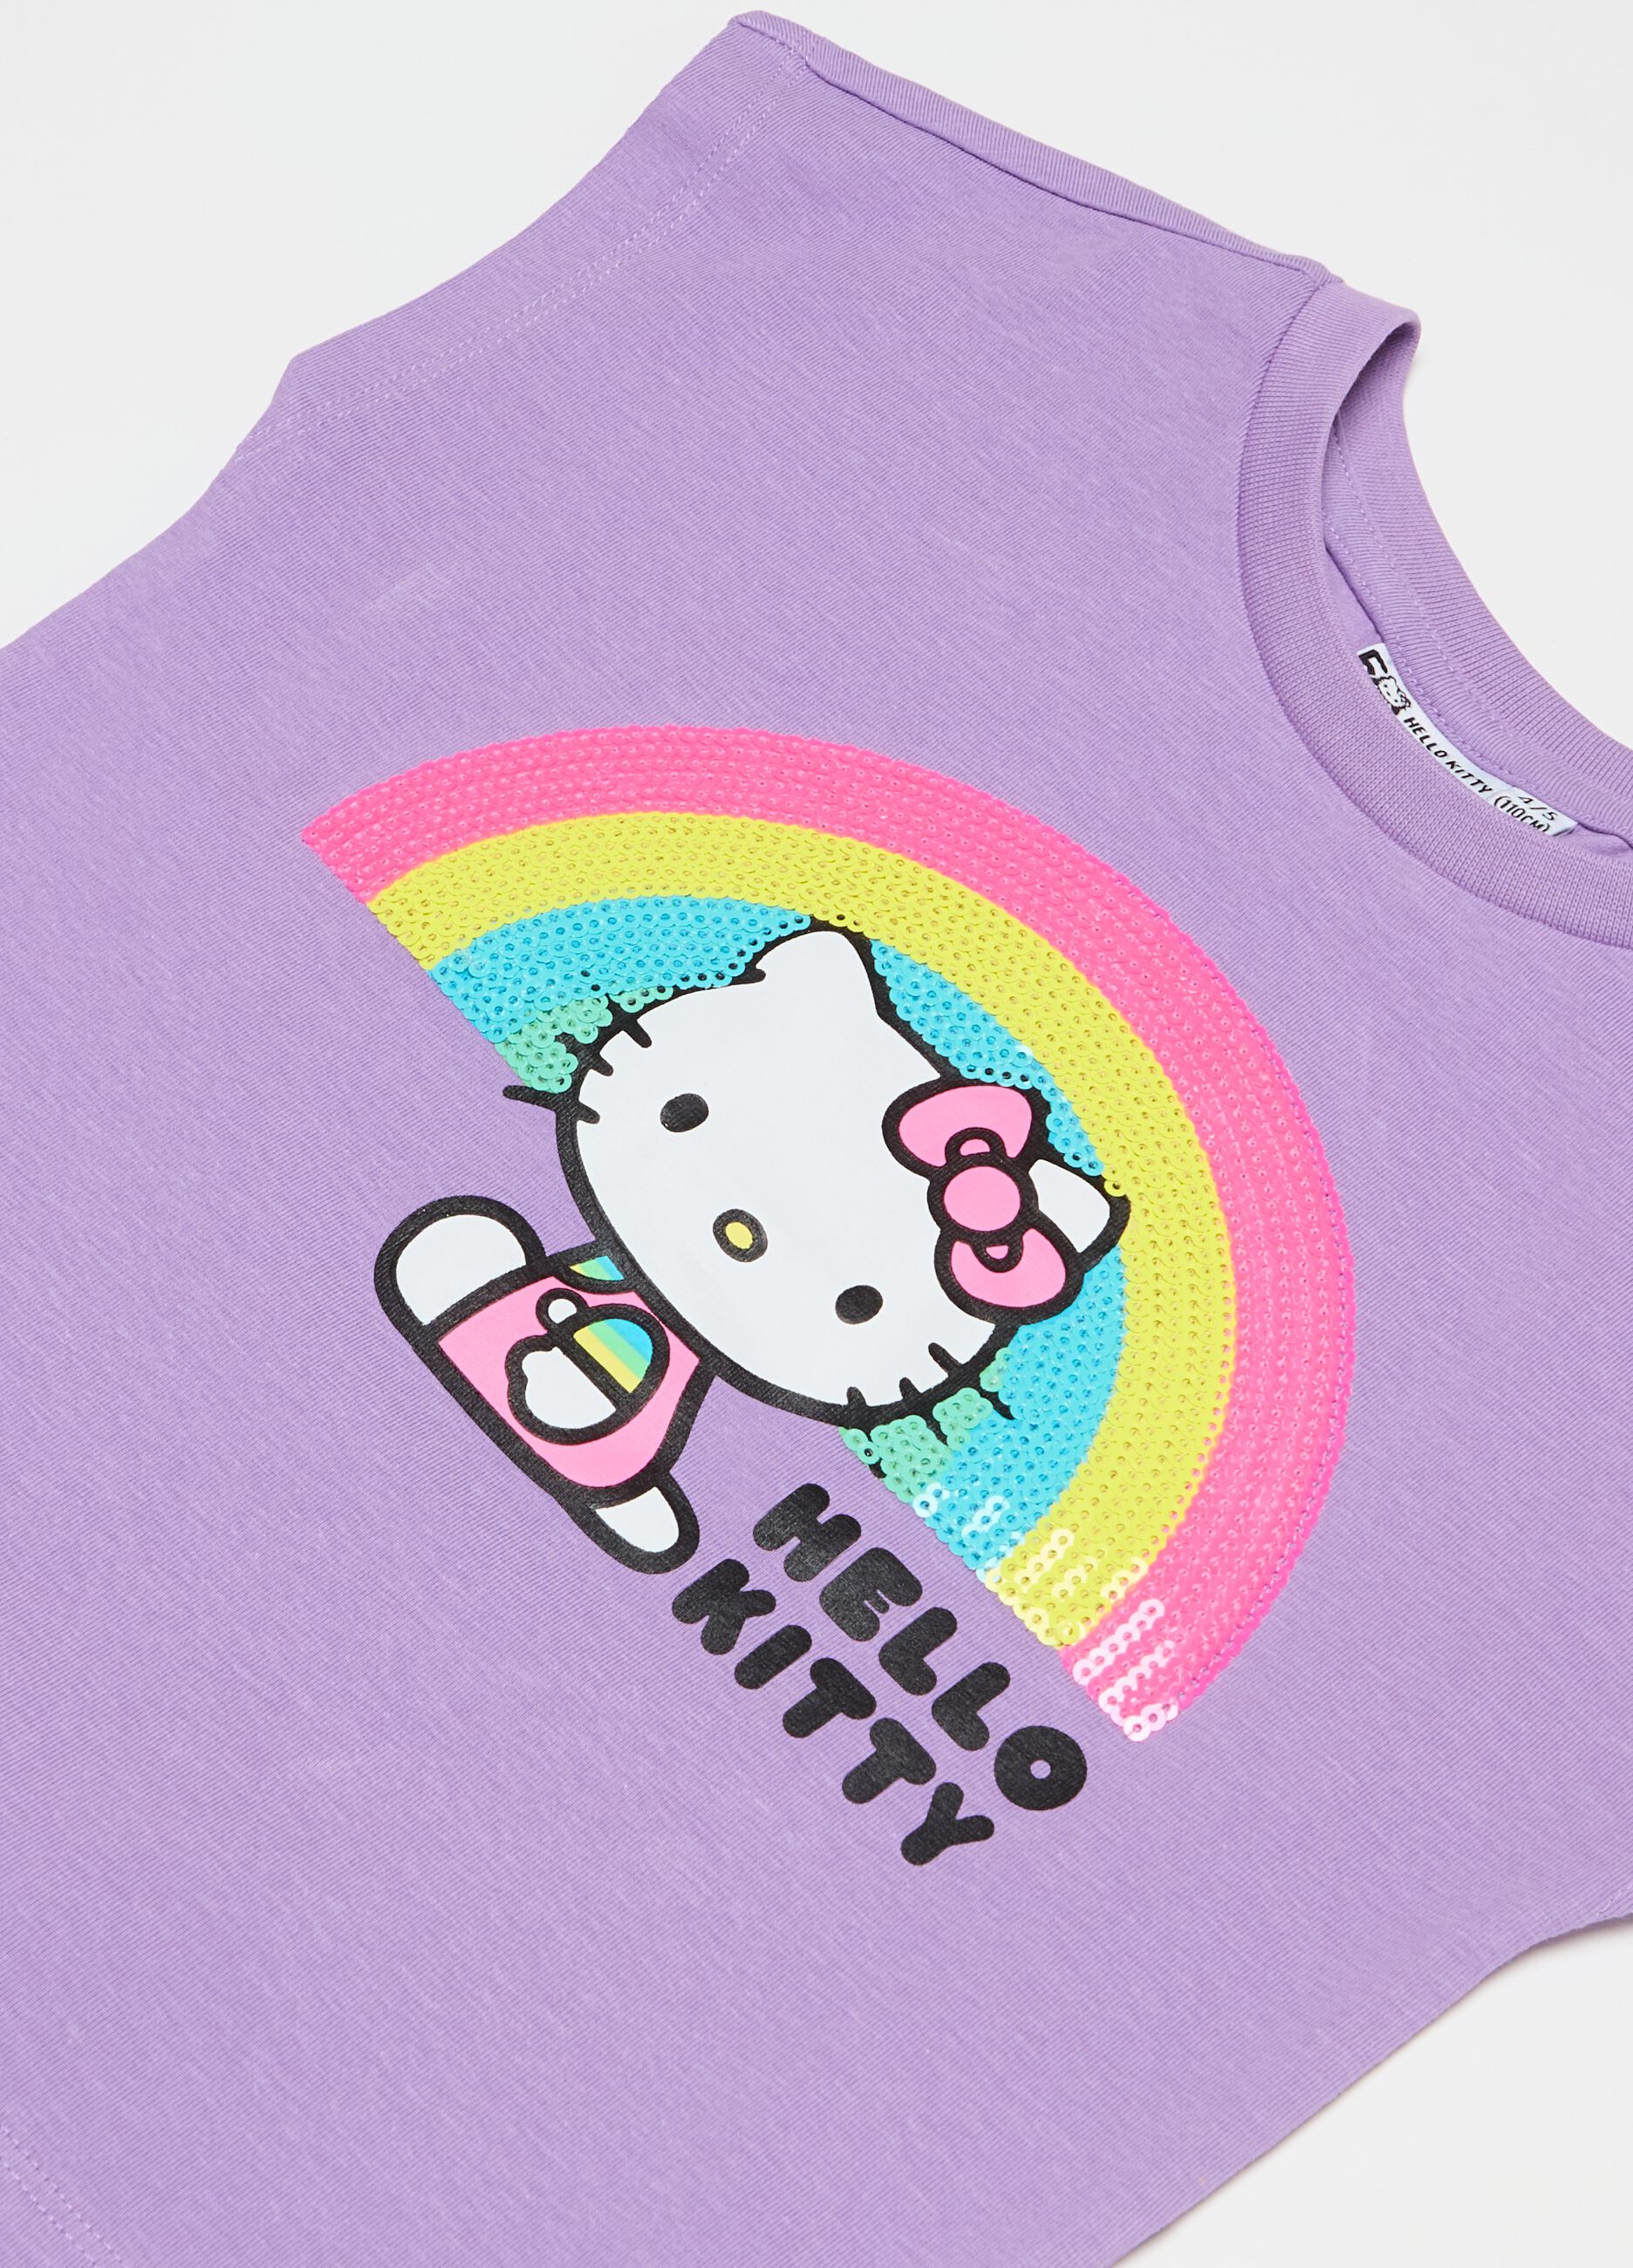 T-shirt with Hello Kitty print with rainbow